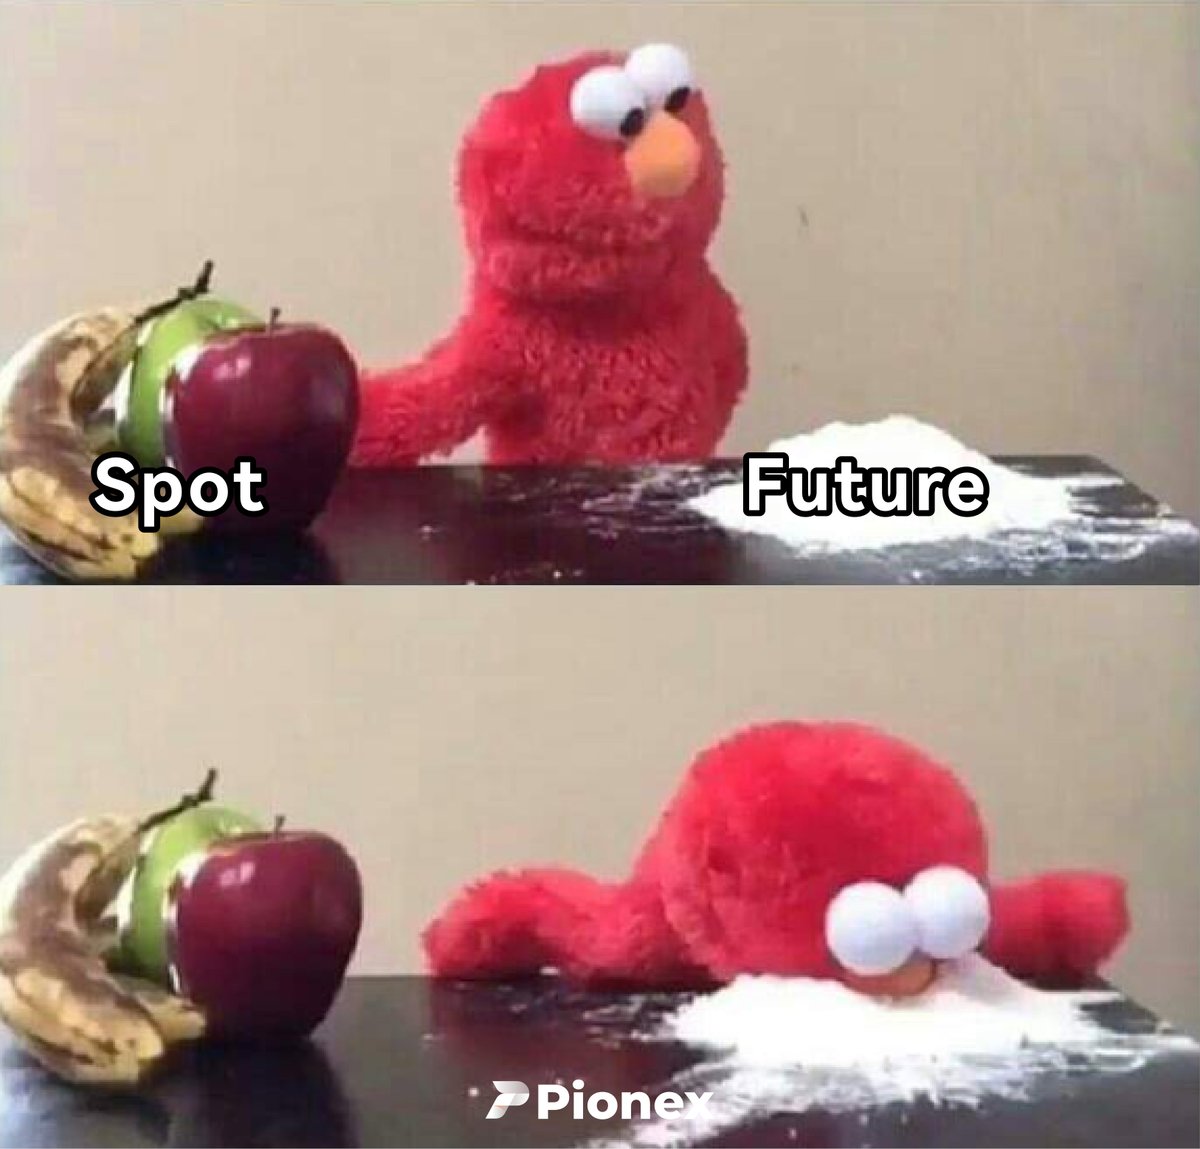 ☺️Trading futures ain't wrong, just don't forget your risk management and don't be addicted!🧡 #Pionex #cryptocurrency #virtualcurrency #spot #future #meme #memes